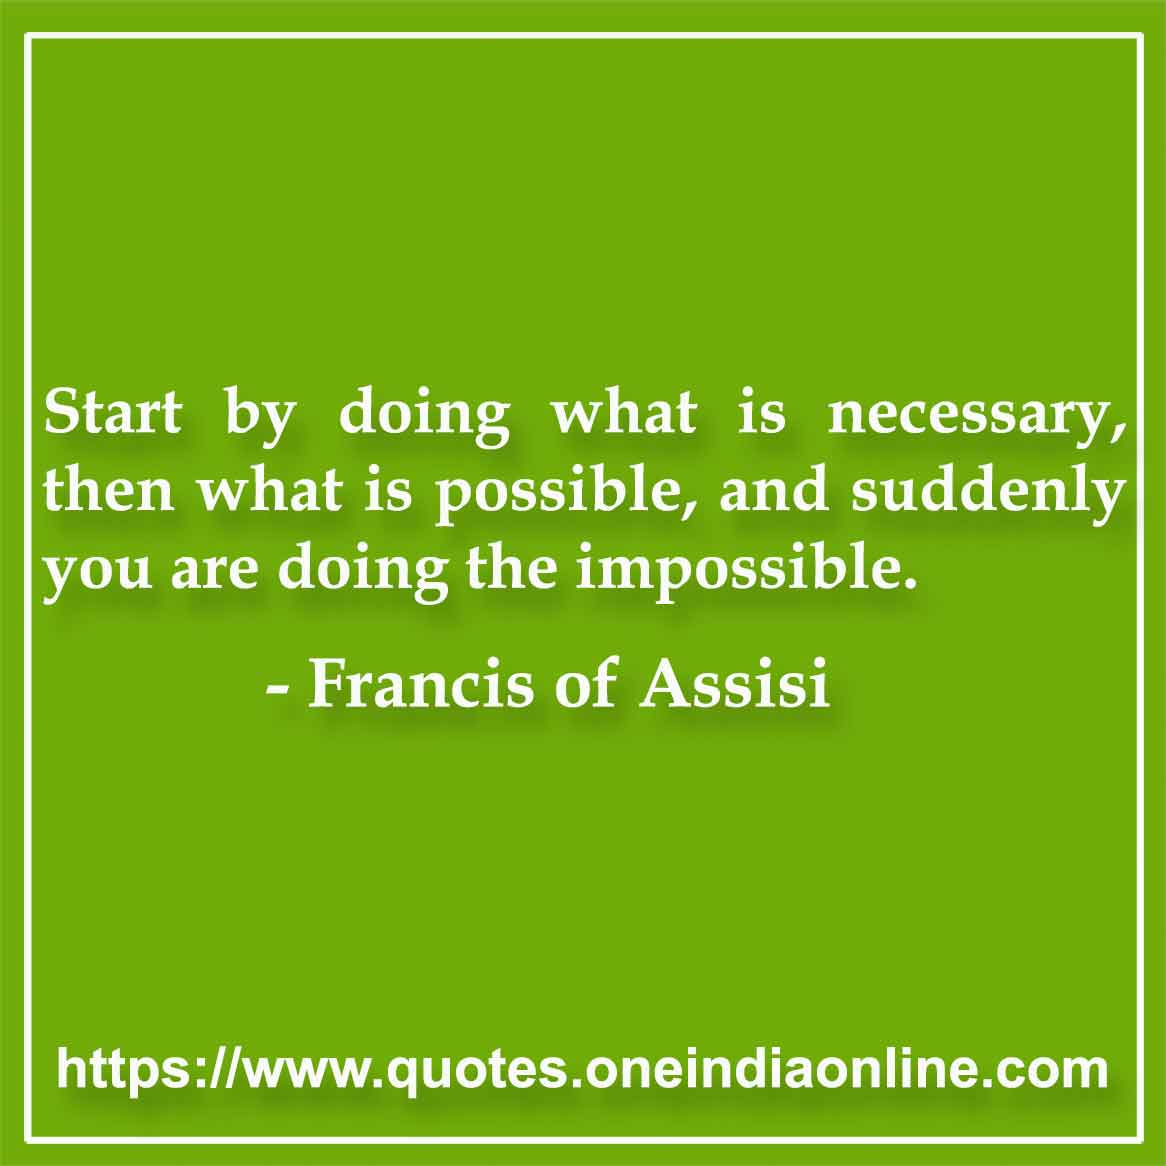 Start by doing what is necessary, then what is possible, and suddenly you are doing the impossible.

-  Francis of Assisi